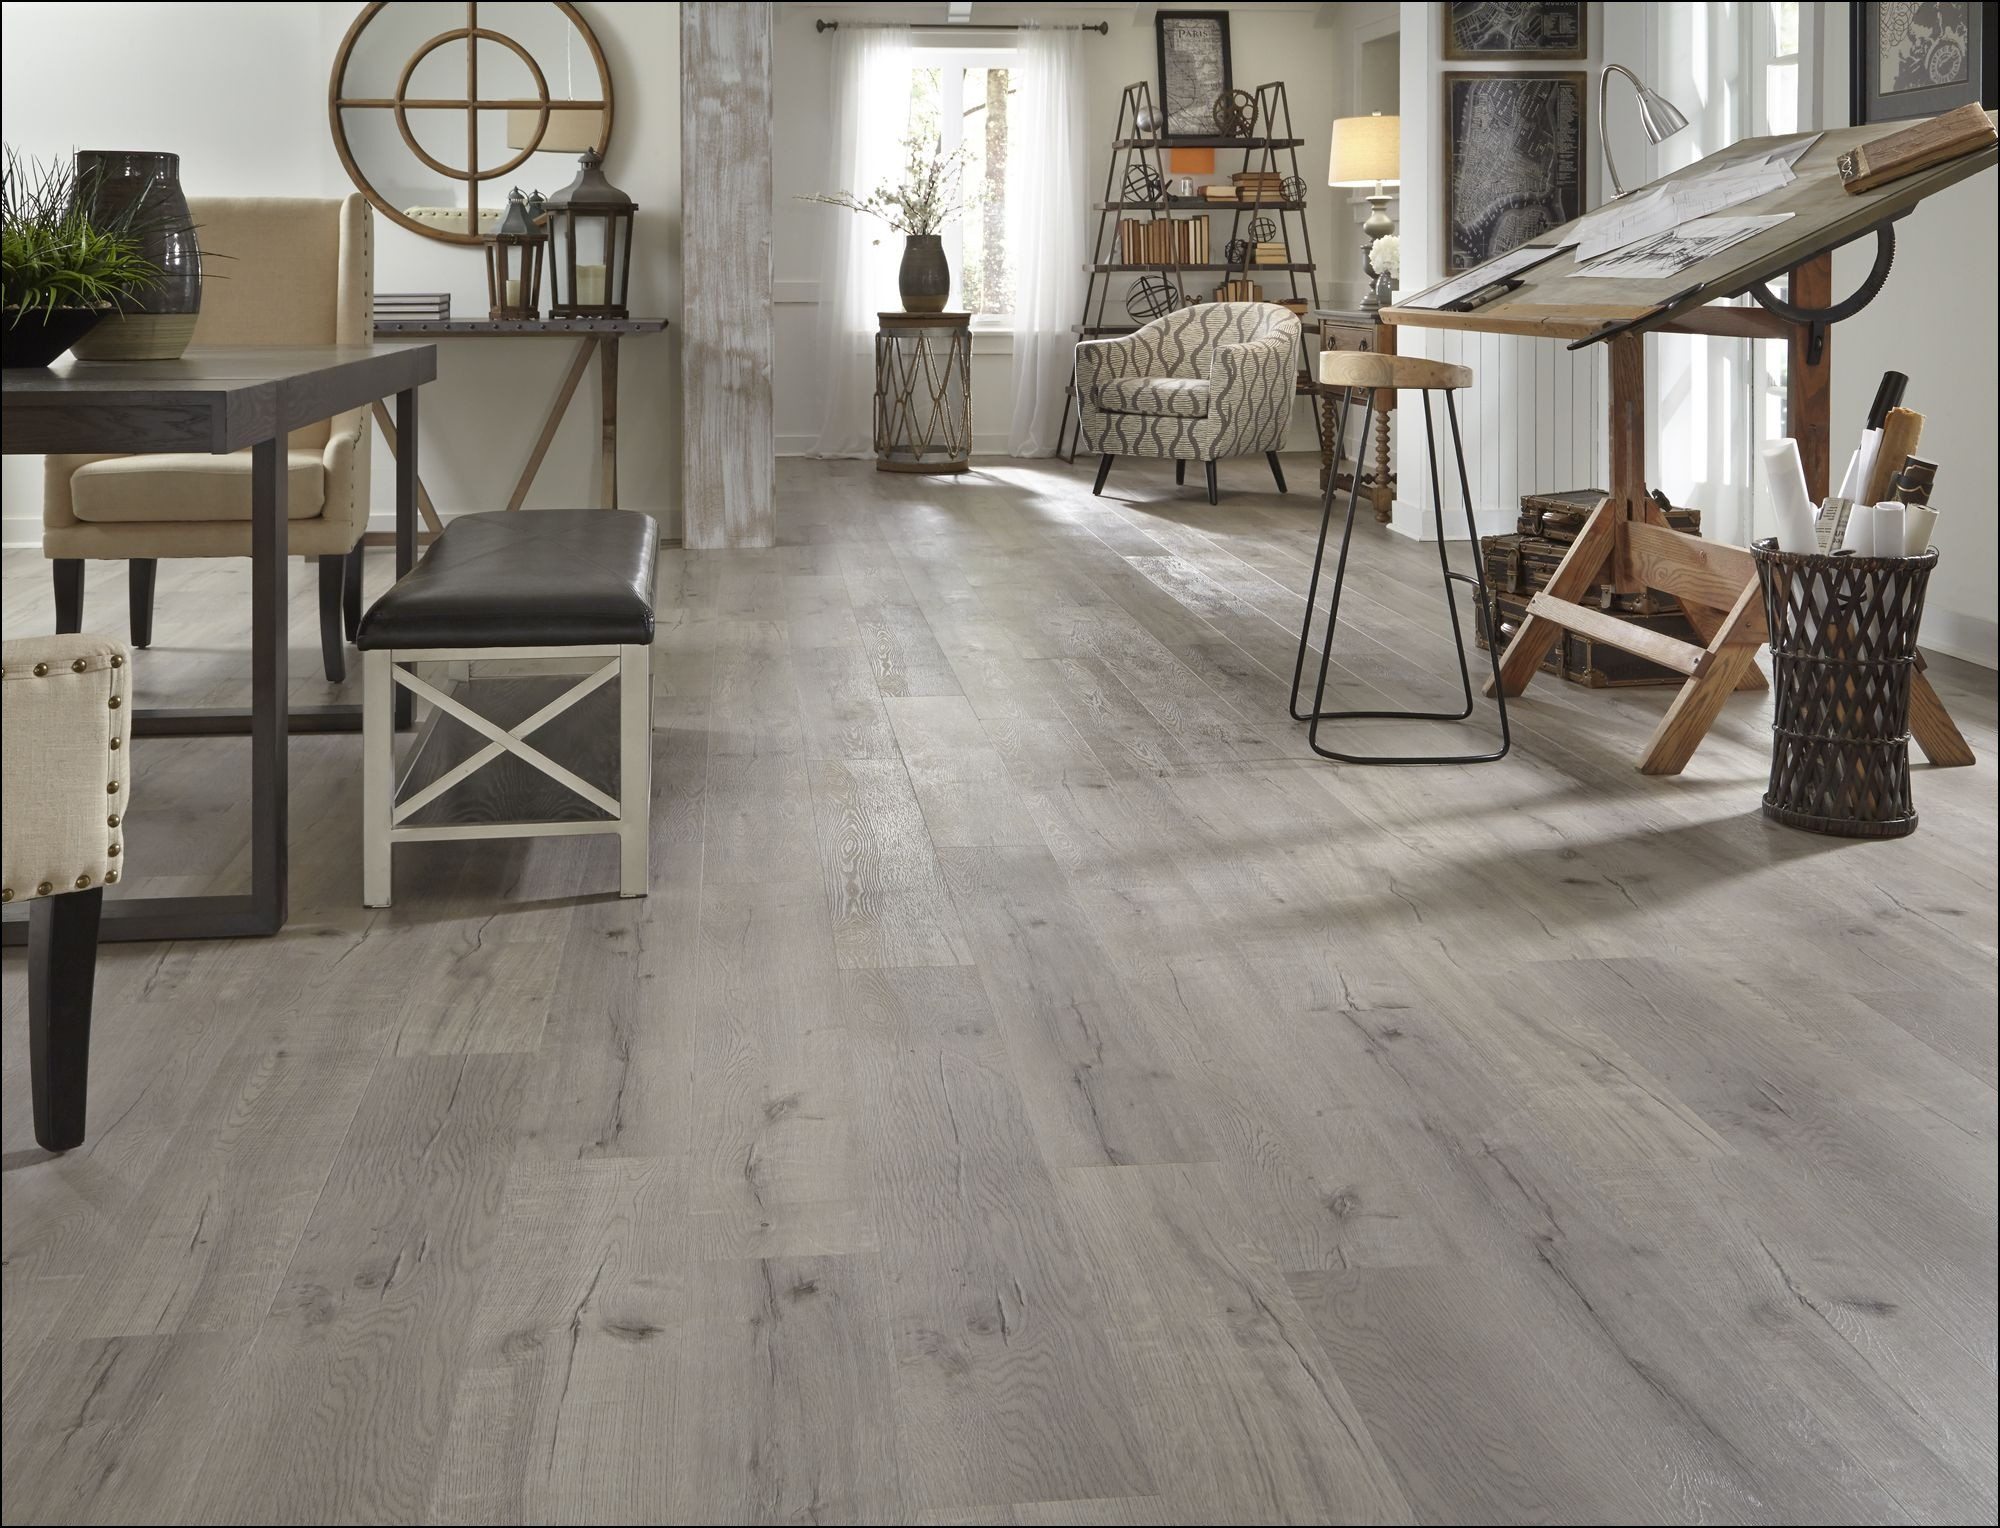 22 Lovely Hardwood Floor Options Home 2024 free download hardwood floor options home of hardwood flooring suppliers france flooring ideas in hardwood flooring pictures in homes collection this fall flooring season see 100 new flooring styles like